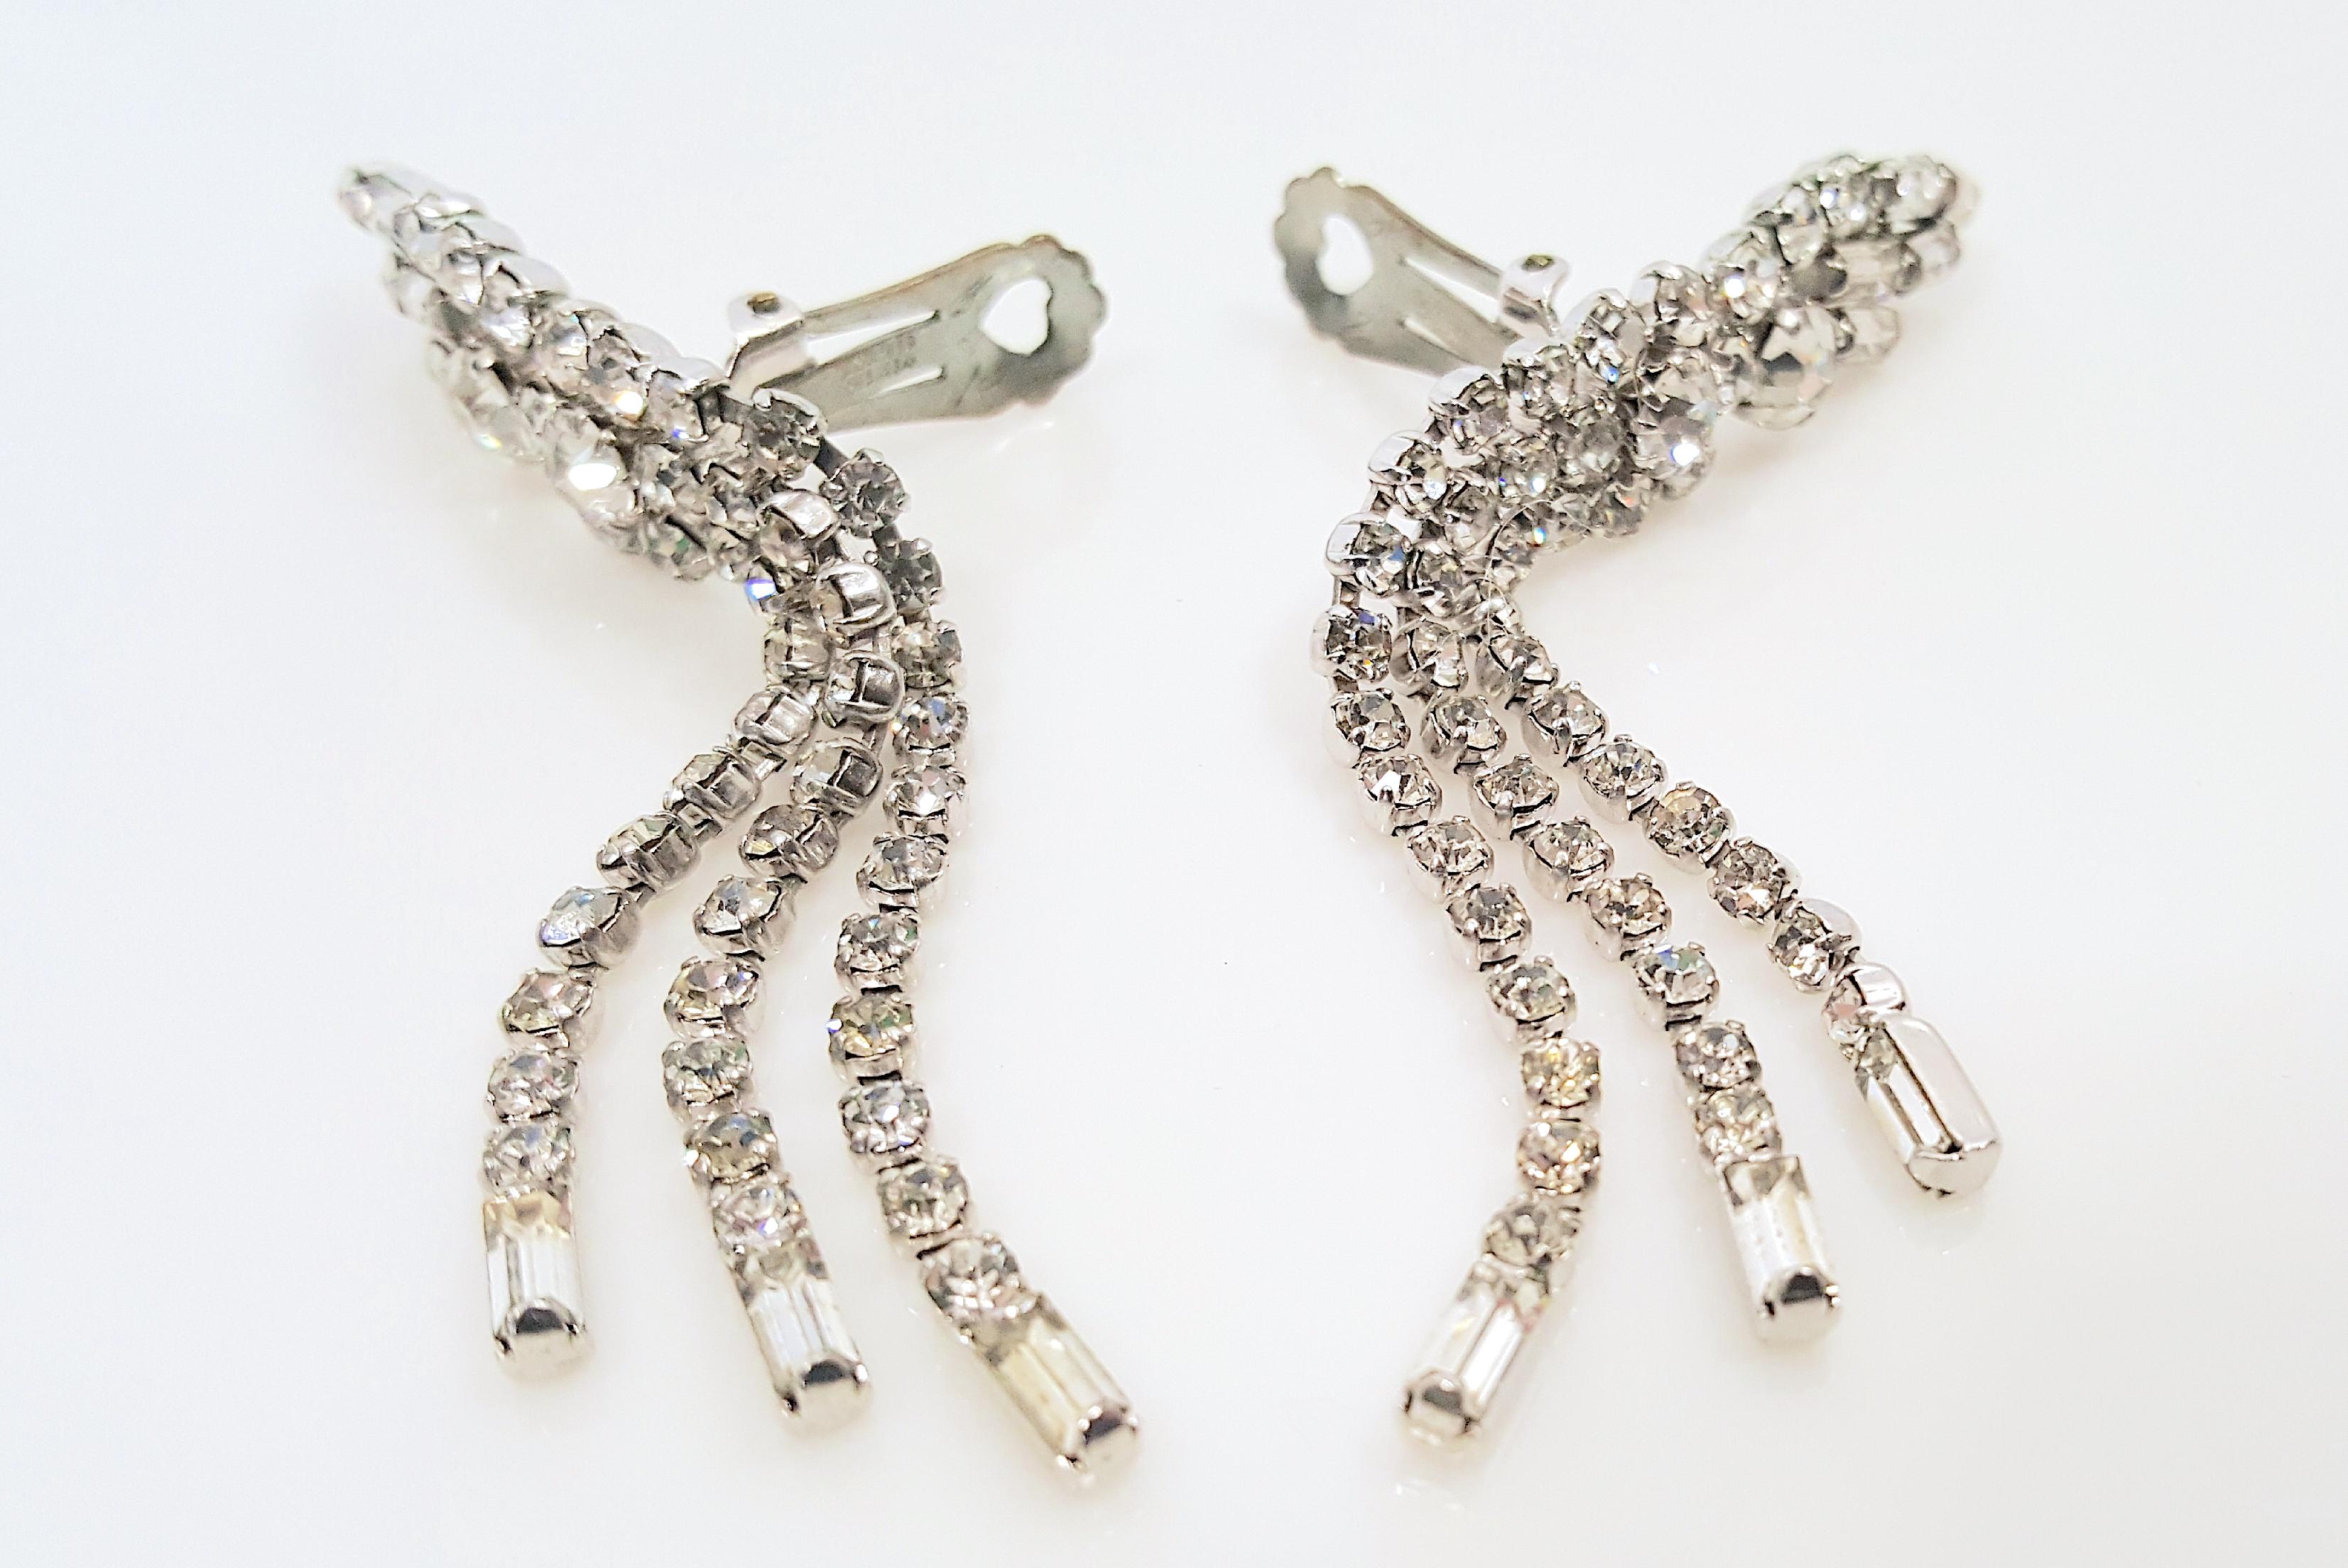 Modern HautCoutureDiorDesignerWesternGermanyMaxMuller Crystal SinuousDangleClipEarrings For Sale